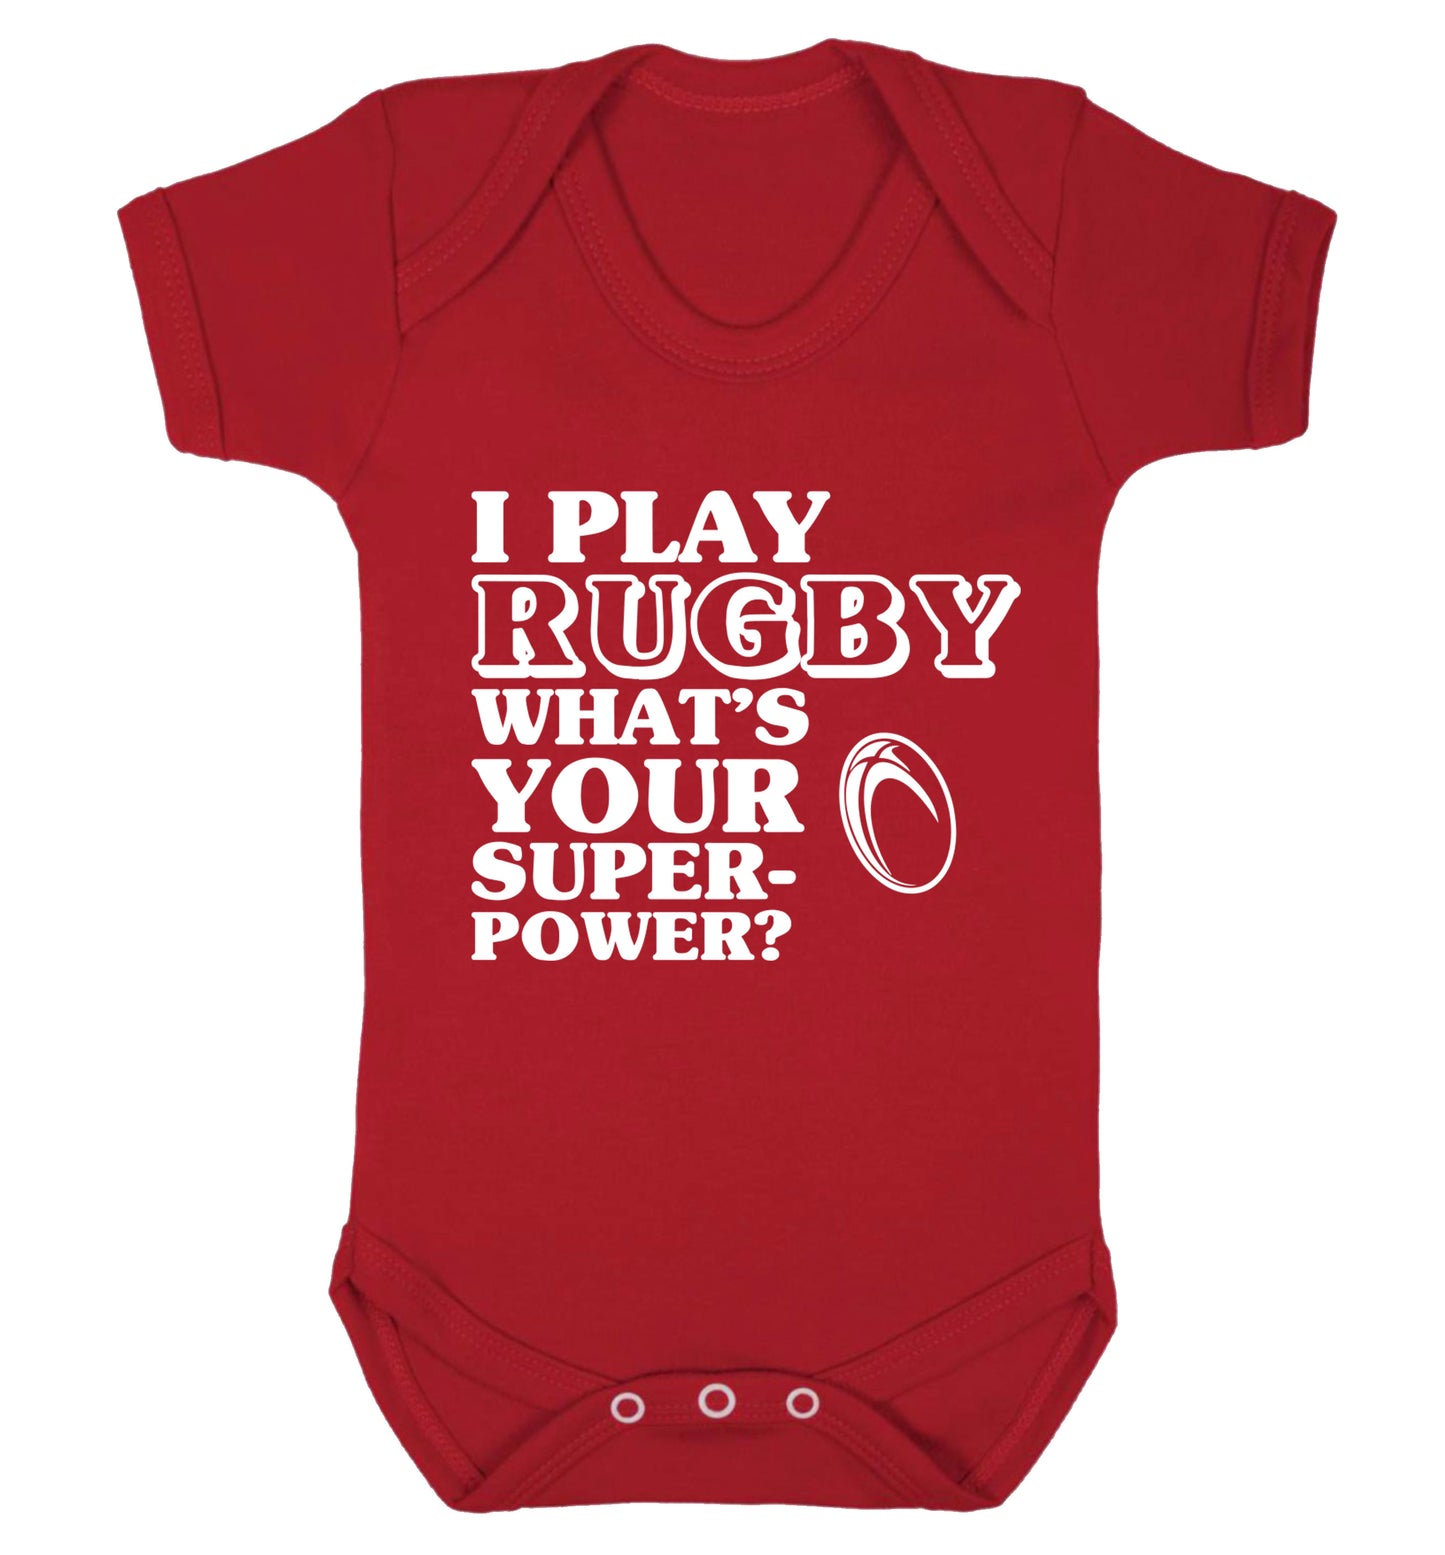 I play rugby what's your superpower? Baby Vest red 18-24 months